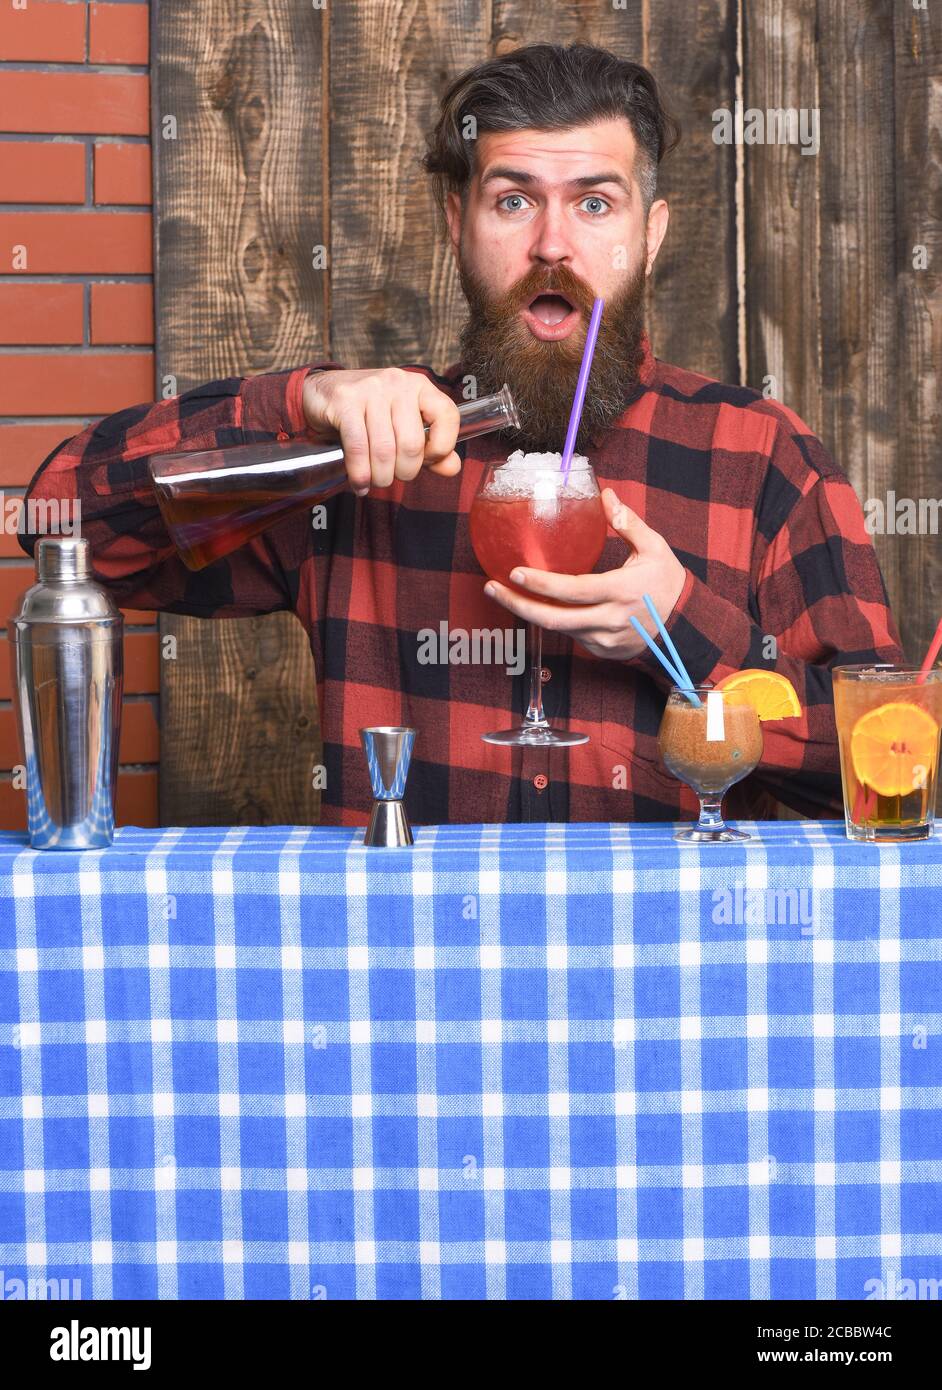 Barman with beard and surprised face makes cocktail, pouring glass with alcohol. Barman or hipster mixing drink. Drinks and party concept. Man holds wineglass and bottle on wooden texture background. Stock Photo